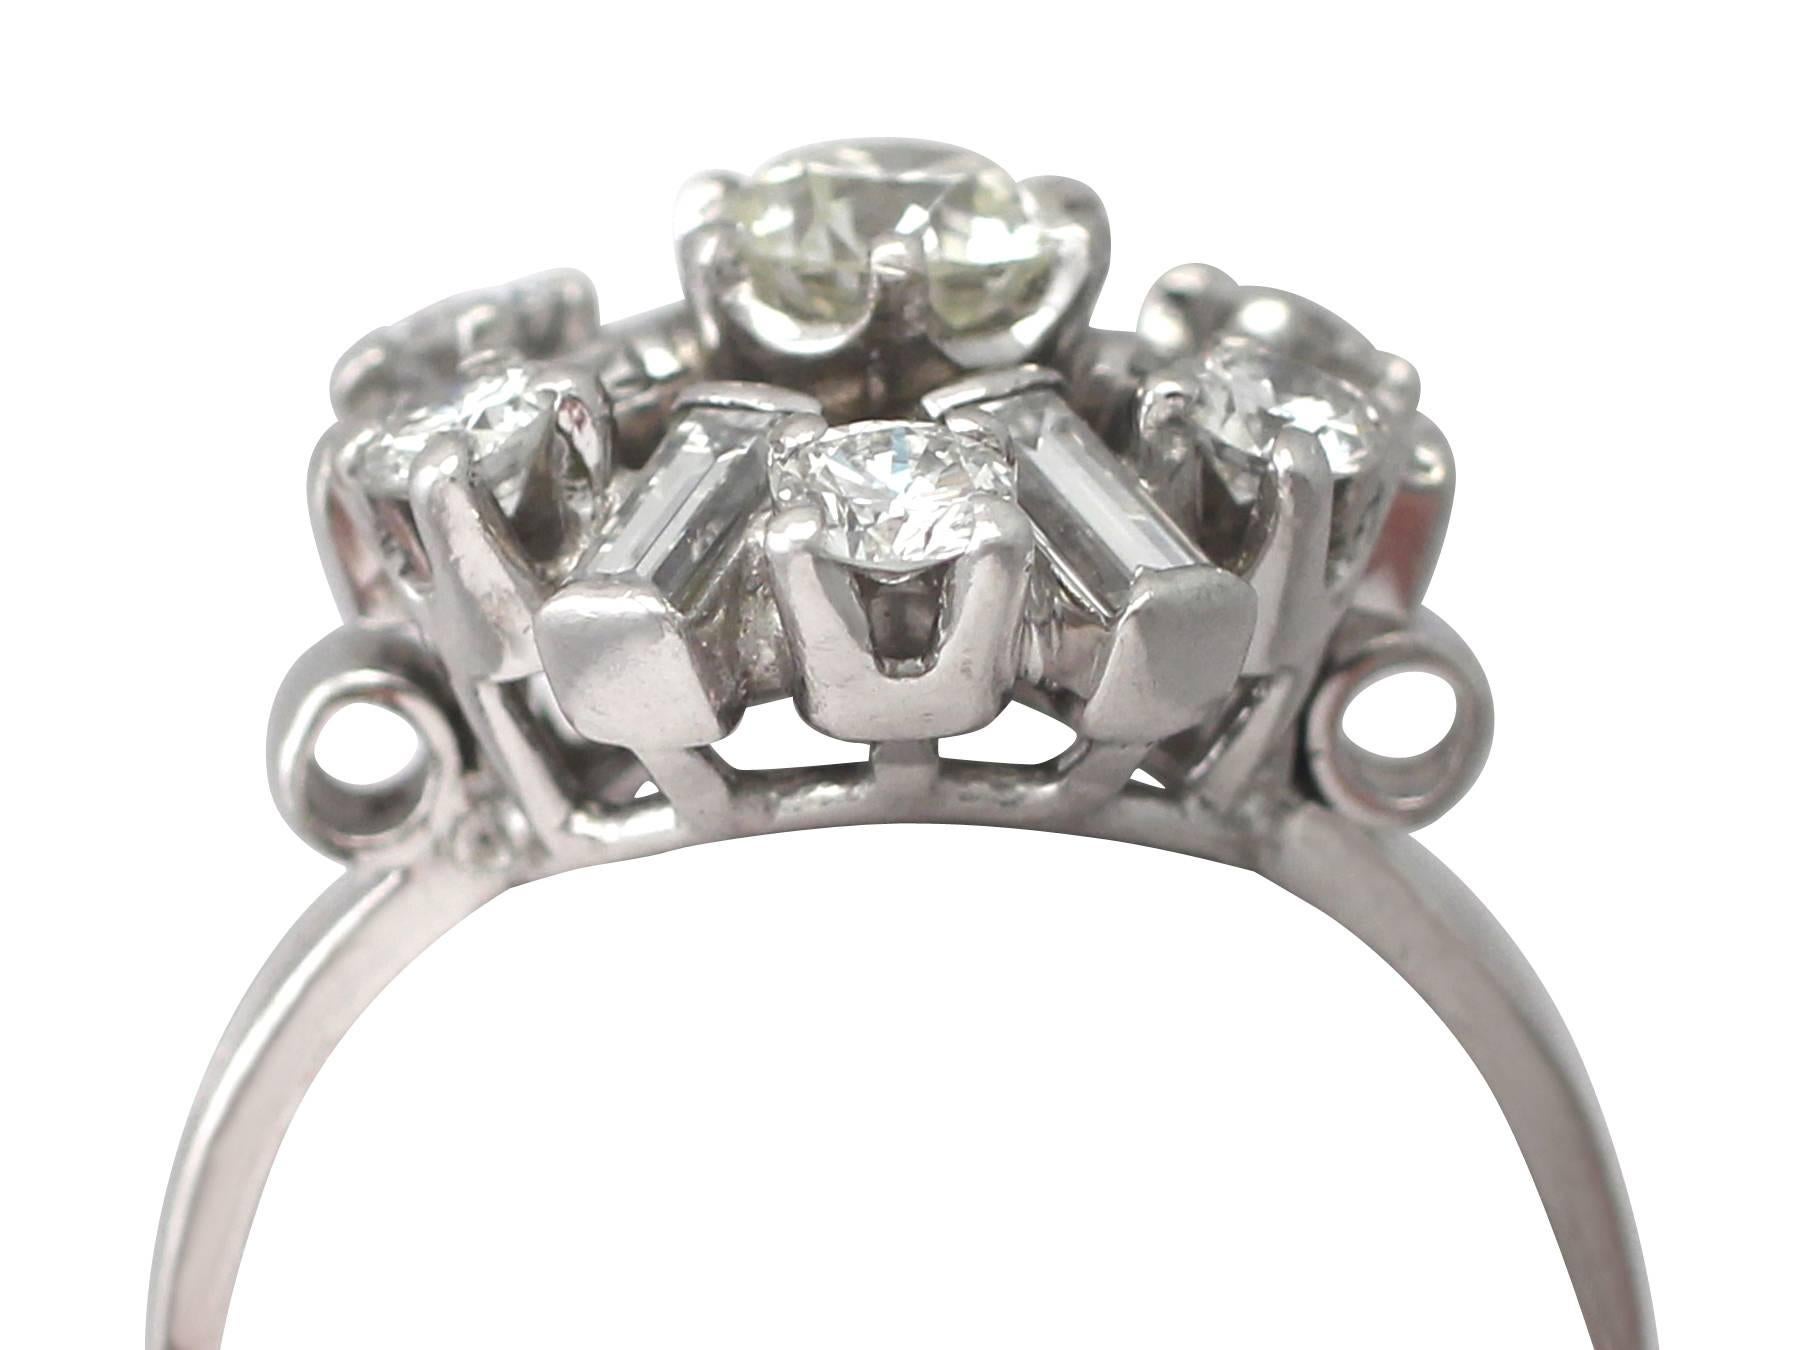 A stunning, fine and impressive vintage 1.66 carat diamond and platinum dress / cluster ring; part of our diverse diamond jewelry and estate jewelry collections

This stunning, fine and impressive diamond cluster ring has been crafted in